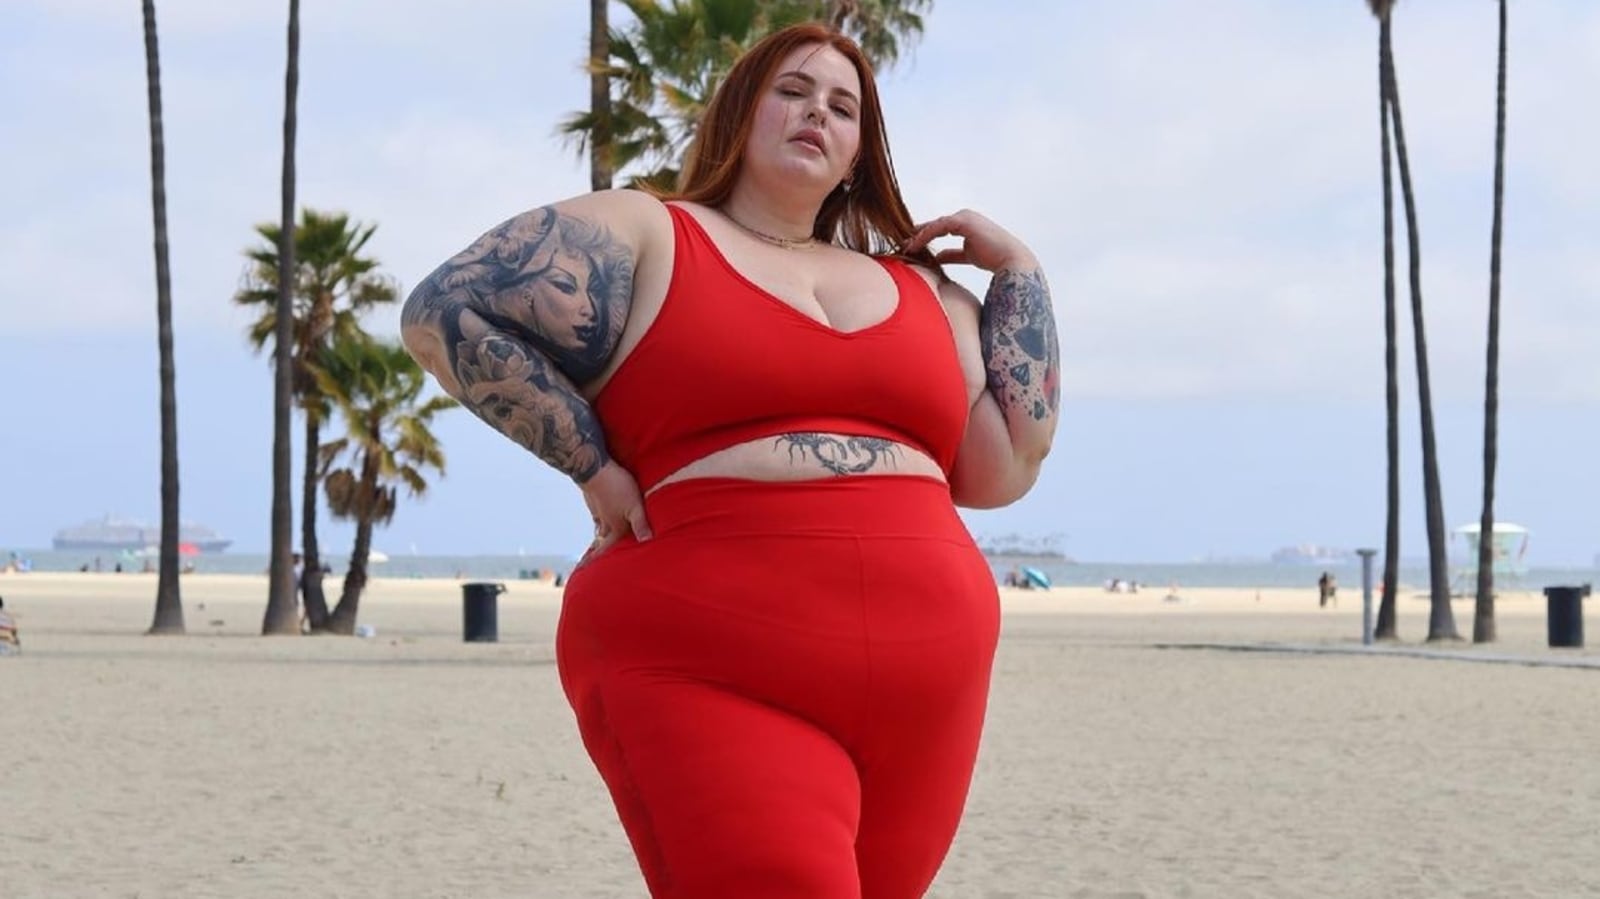 curvy women - latest news, breaking stories and comment - The